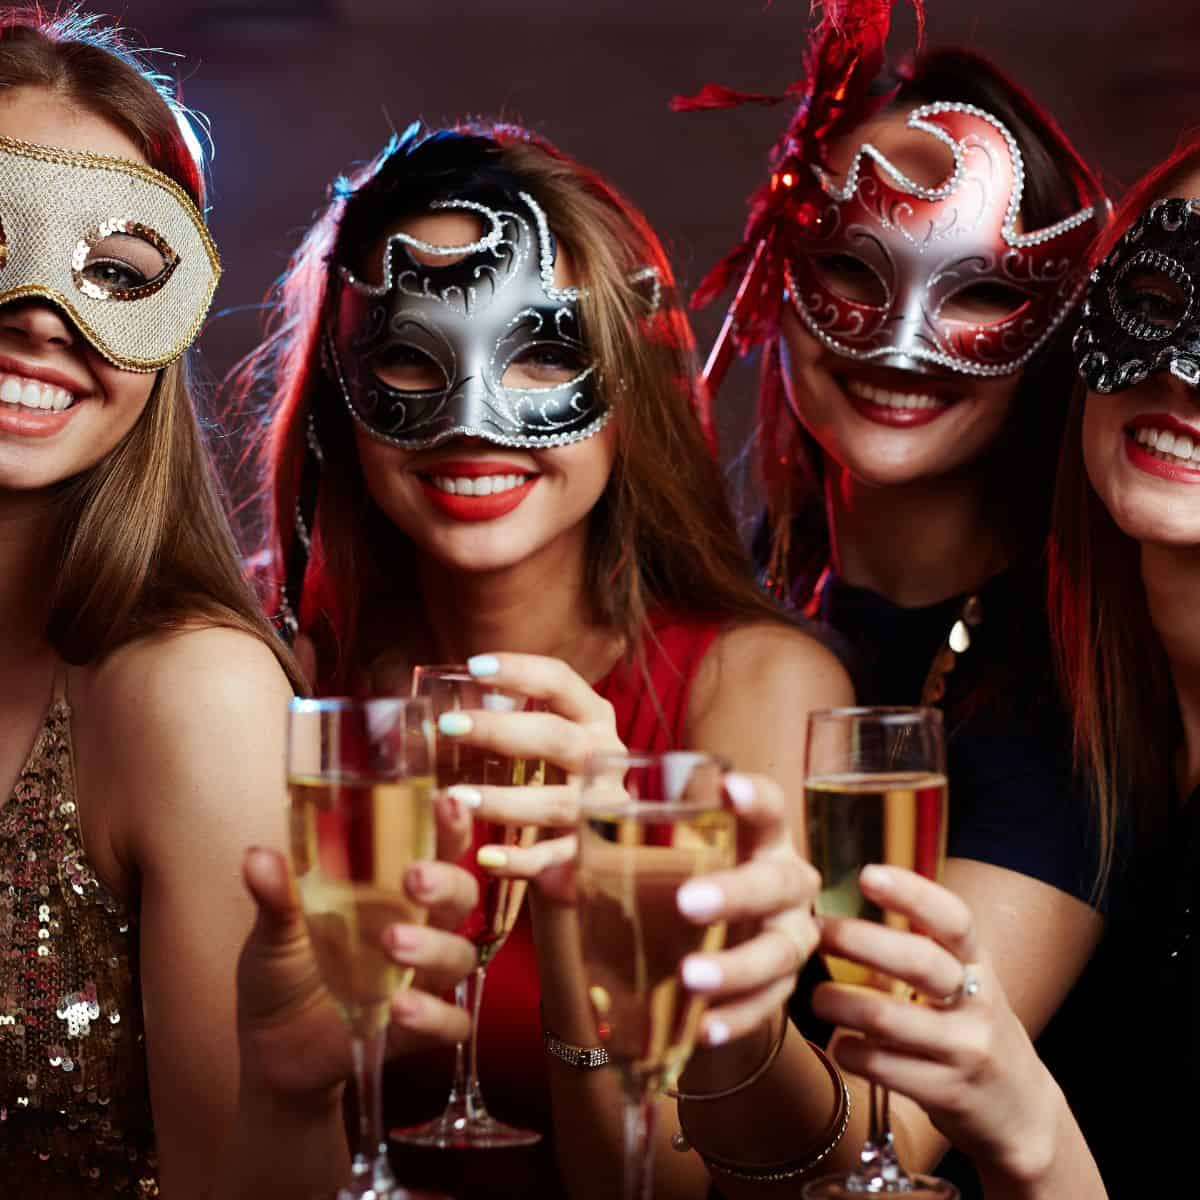 How To Throw A Classy Masquerade Party - Aleka's Get-Together